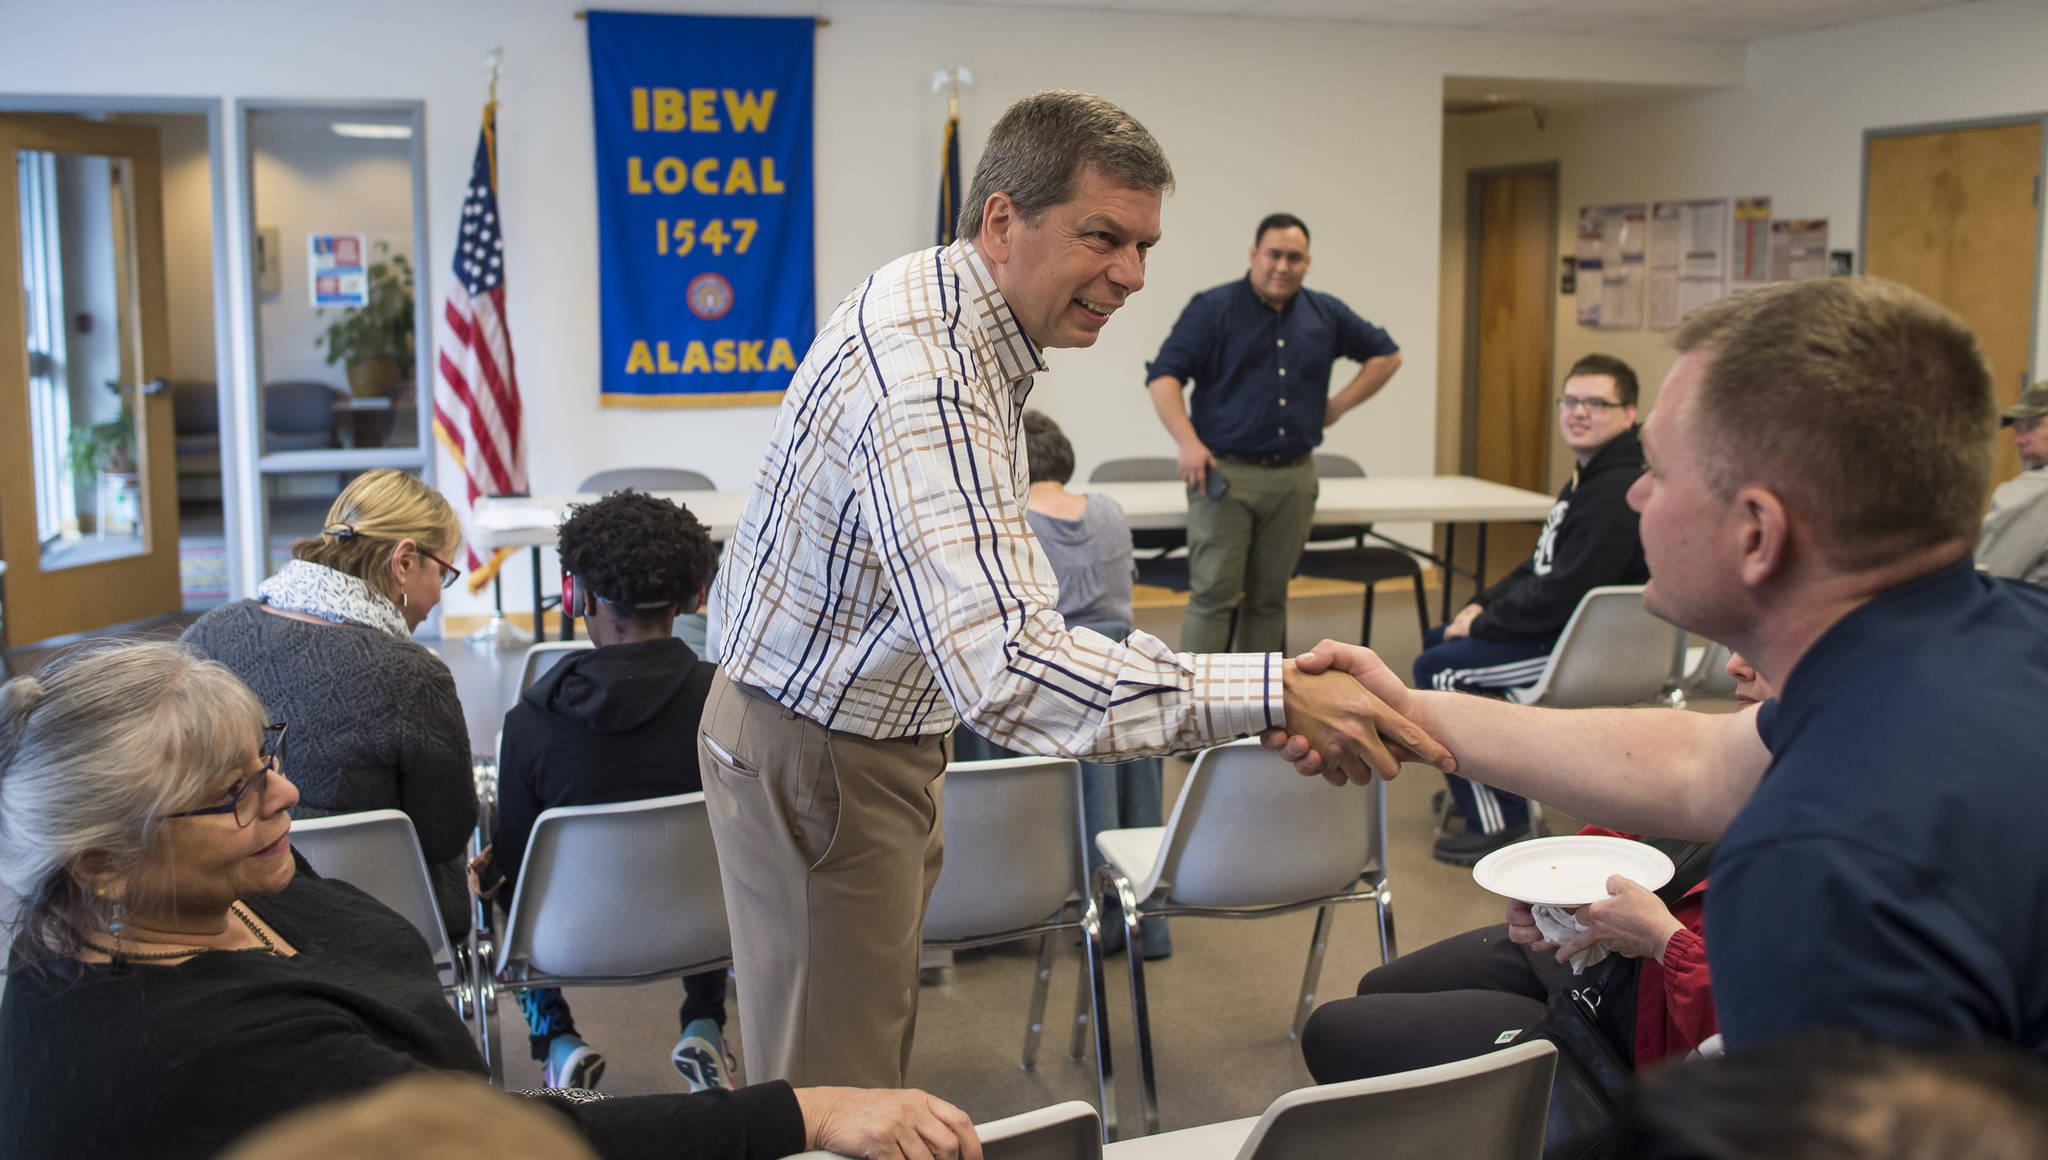 Former Alaska U.S. Senator Mark Begich greets and speaks to Juneau residents interested in his campaign for governor at the IBEWLocal 1547 Union office on Thursday, June 29, 2018. (Michael Penn | Juneau Empire)